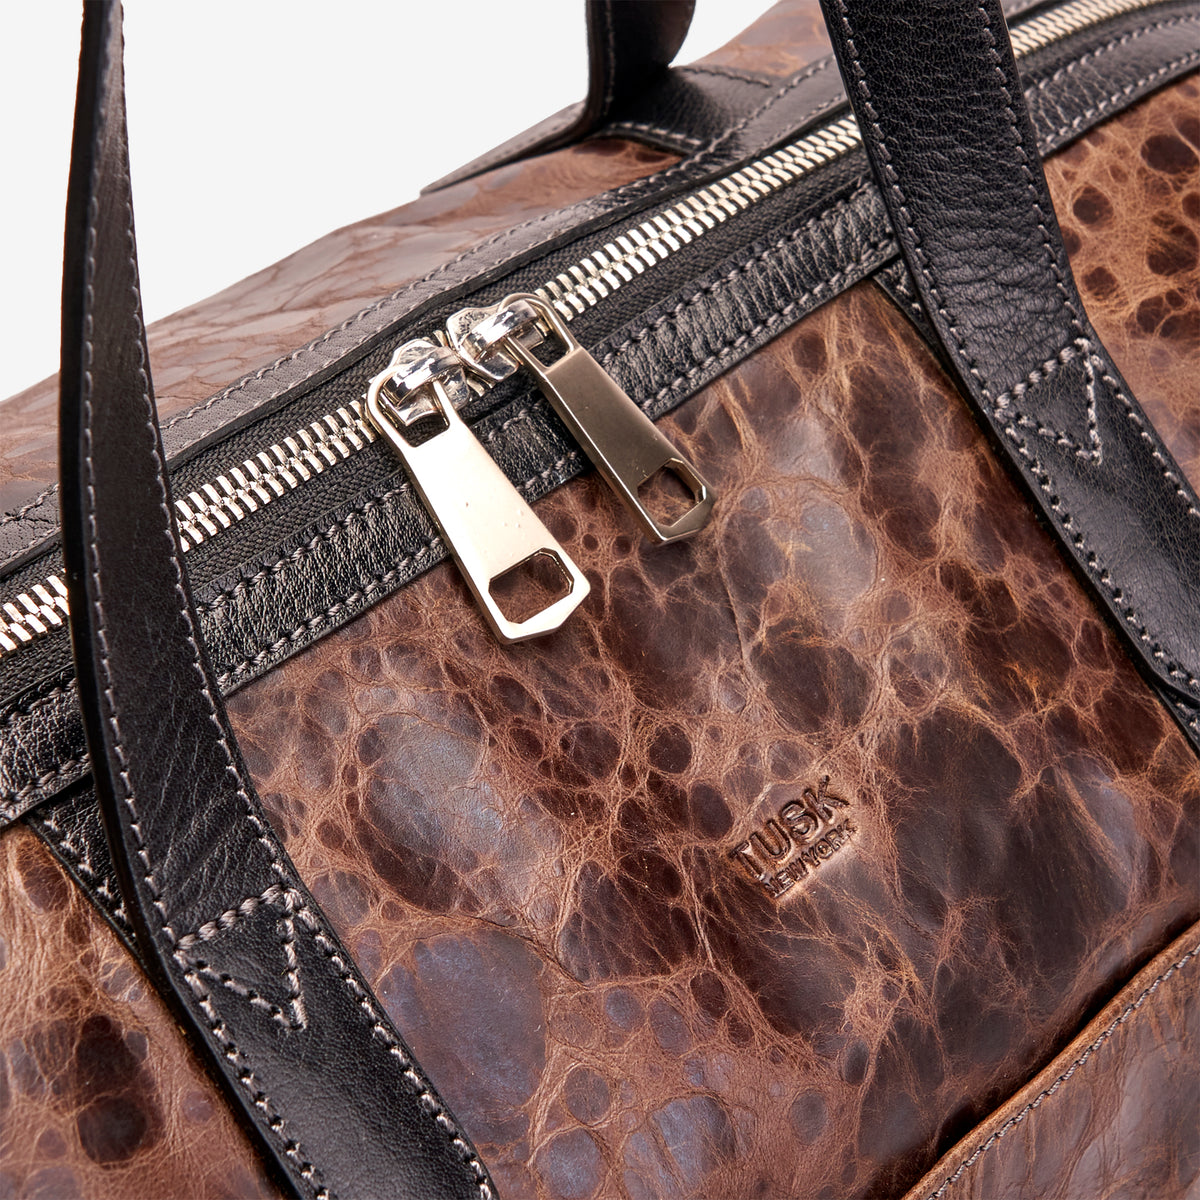     tusk-9920-spotty-leather-everyday-duffel-bag-chocolate-detail-1